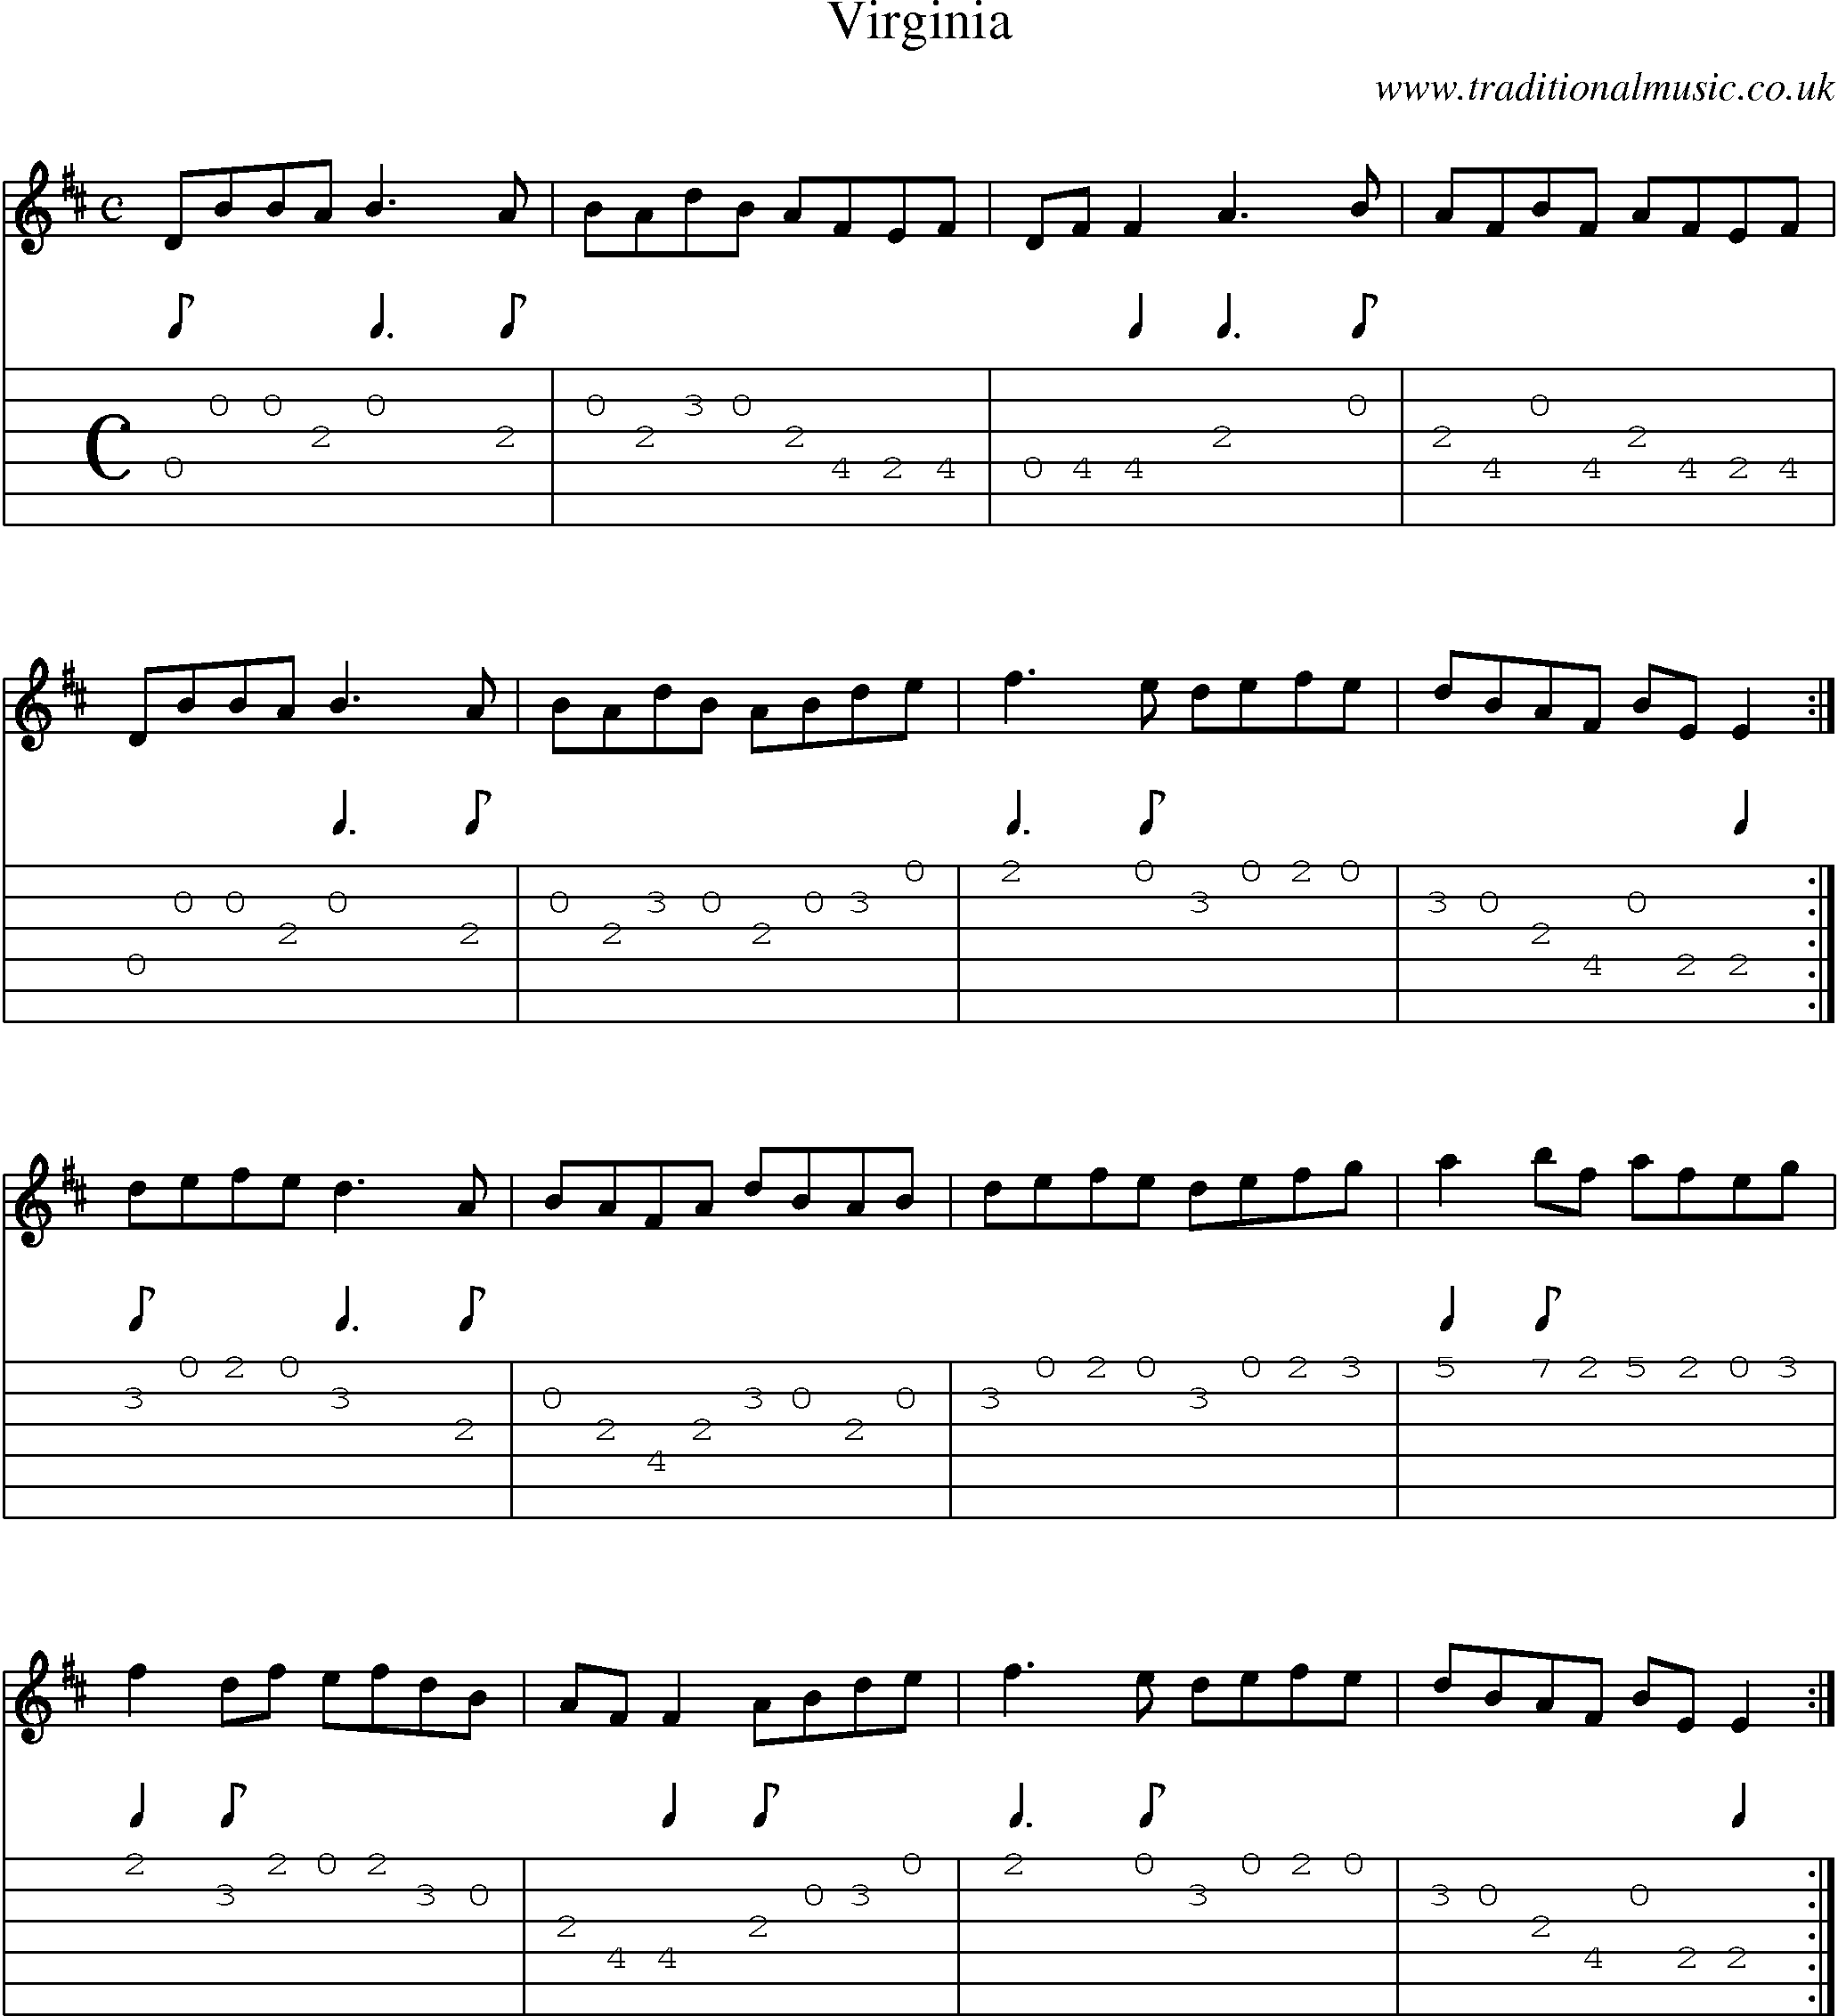 Music Score and Guitar Tabs for Virginia